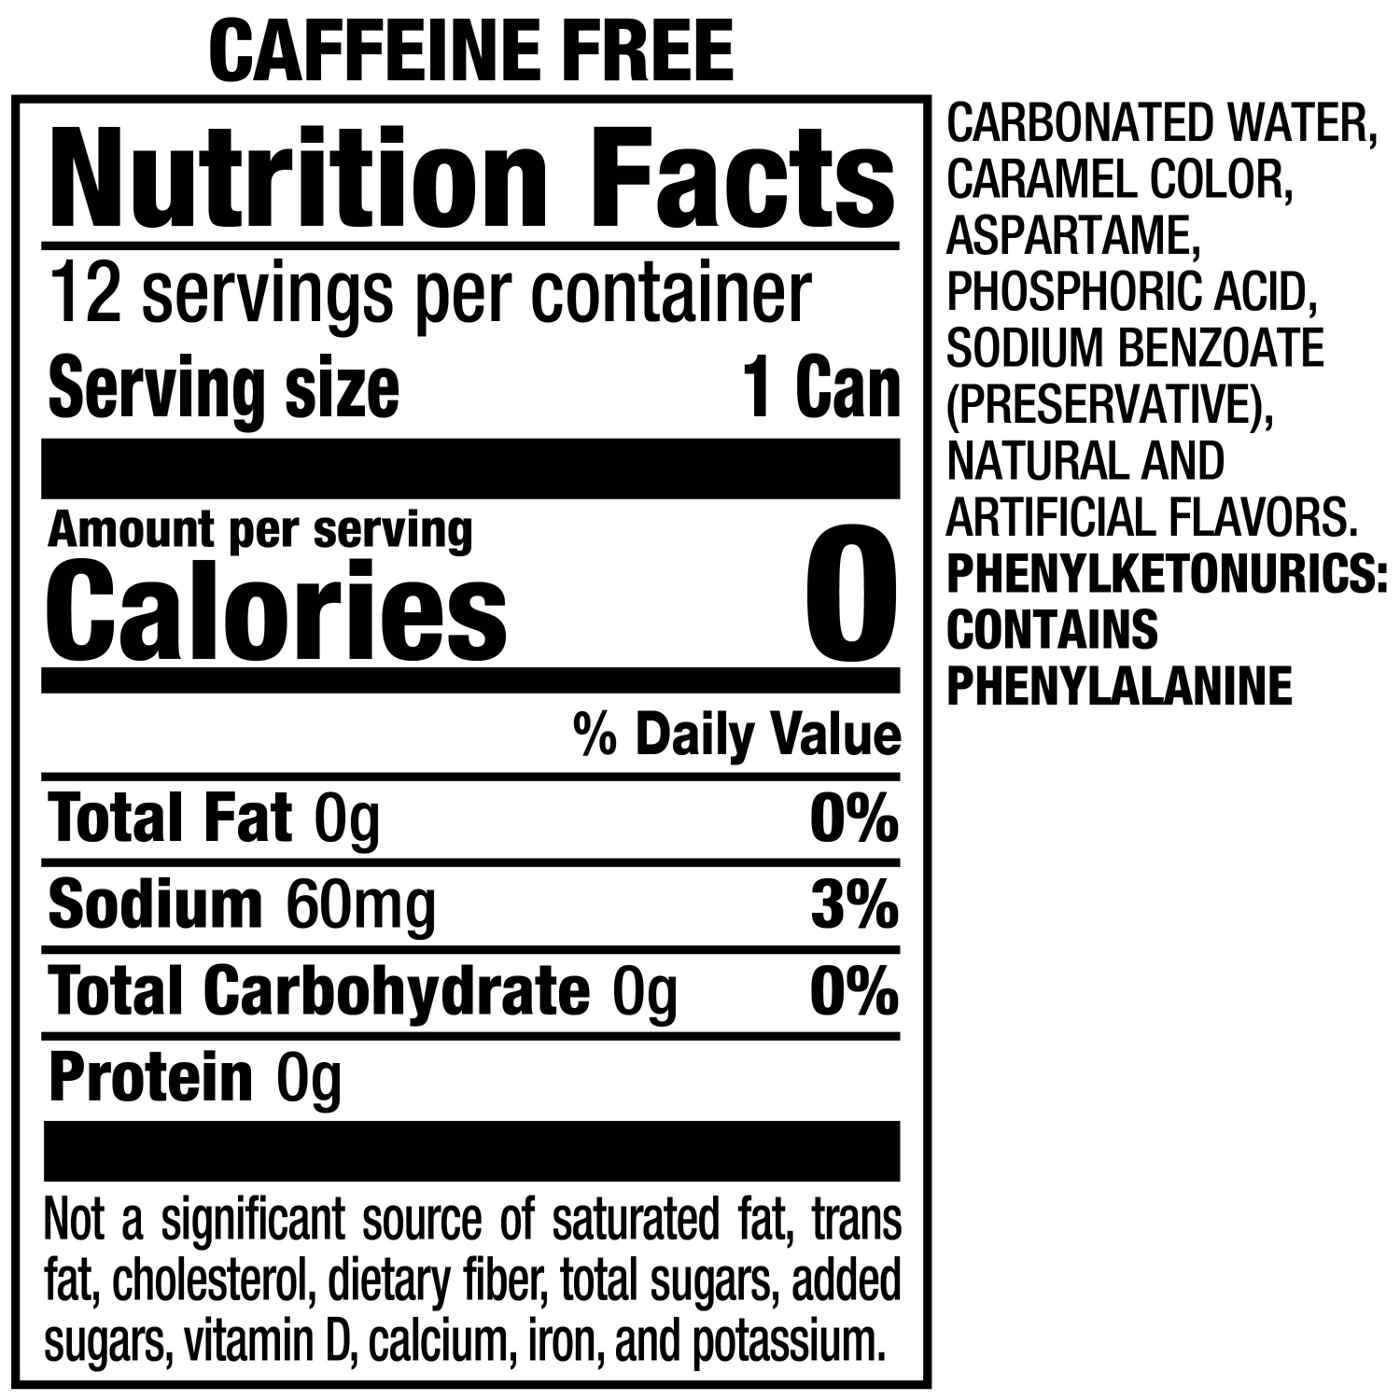 Dr Pepper Caffeine Free Diet Soda 12 oz Cans; image 5 of 7